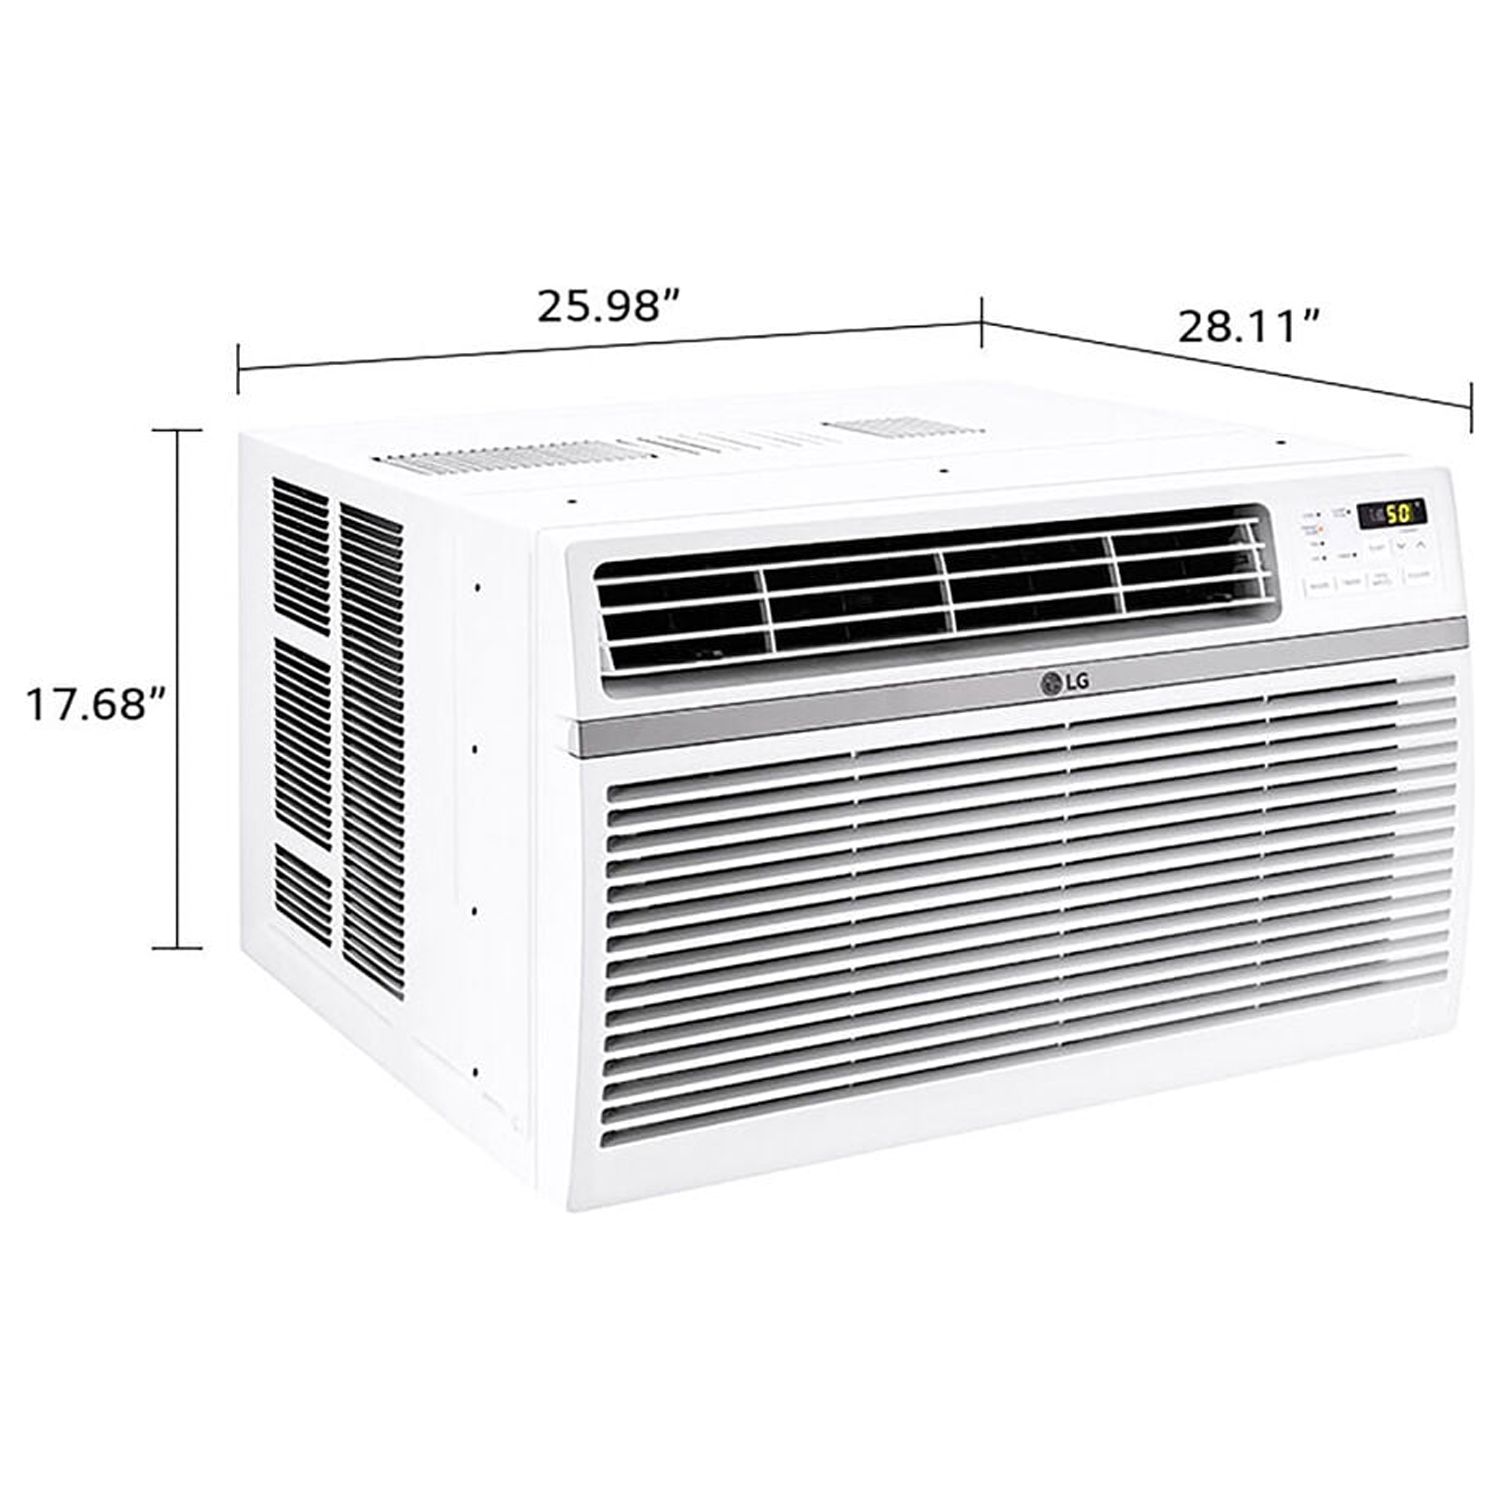 LG 24,500 BTU Window Air Conditioner, 1,560 Sq.ft. (39'x40' Room Size), Remote, 230/208V - image 4 of 11